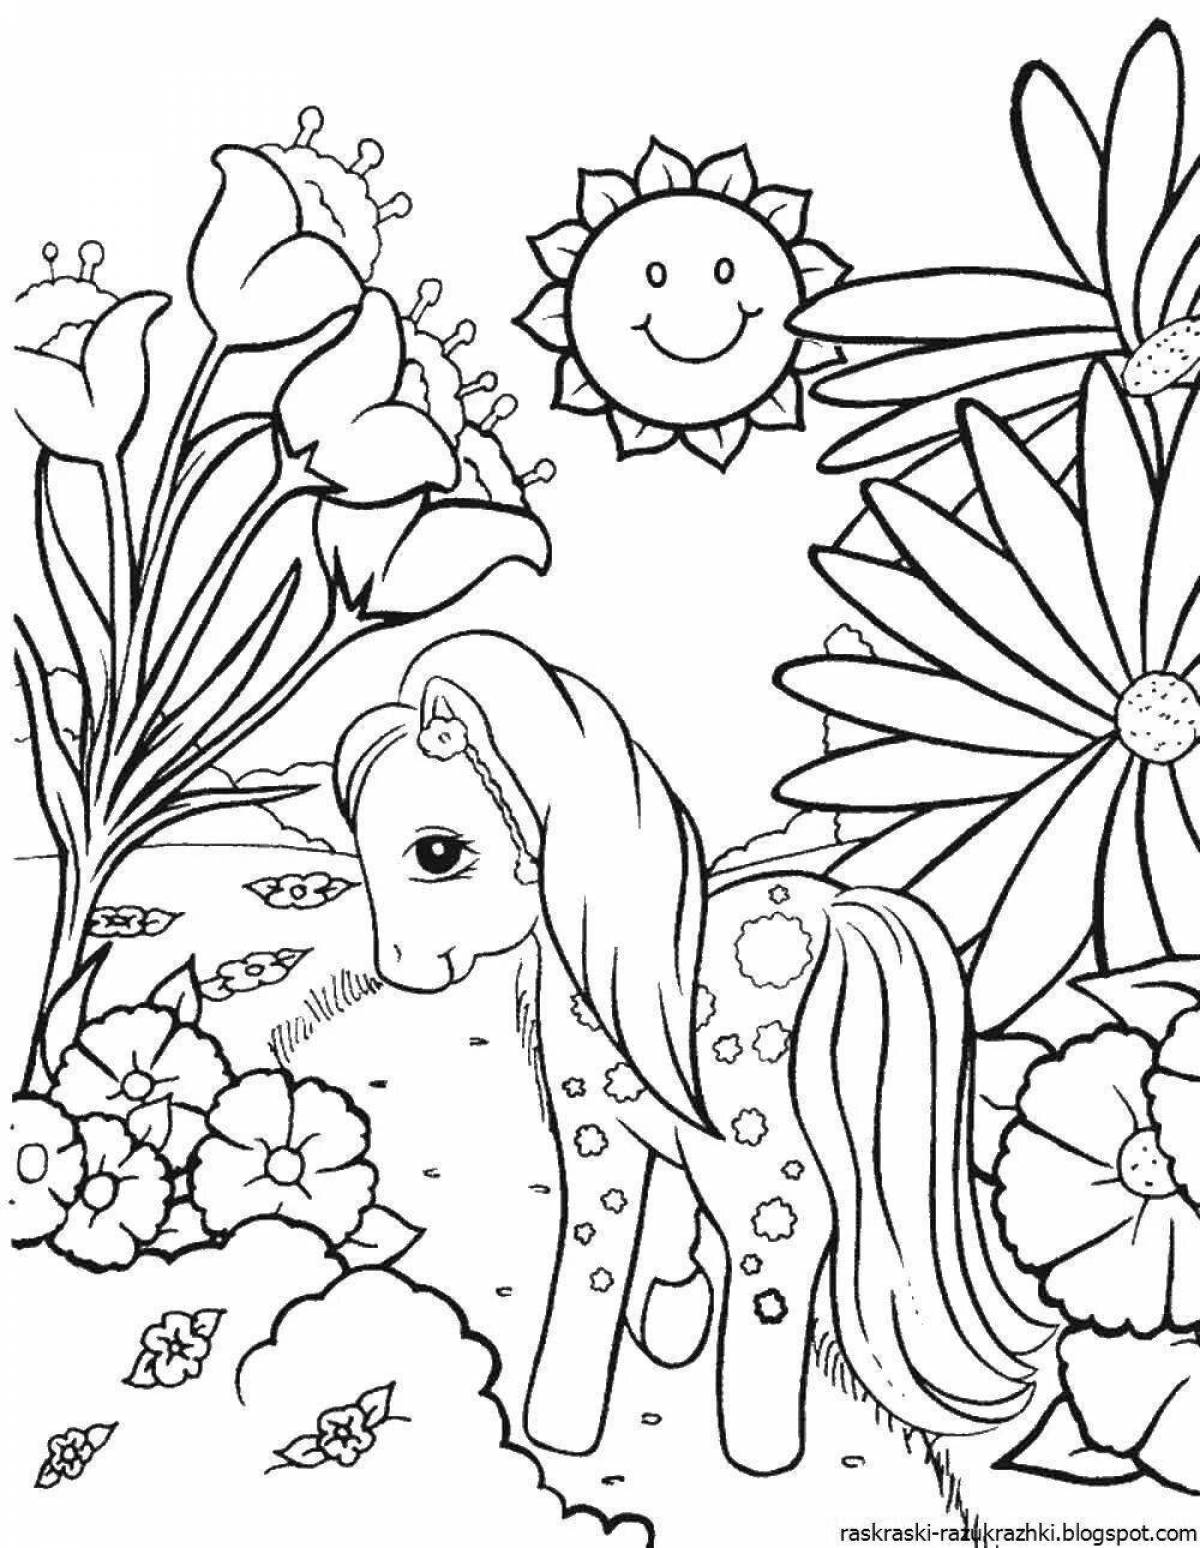 Amazing coloring book for girls 7-8 years old